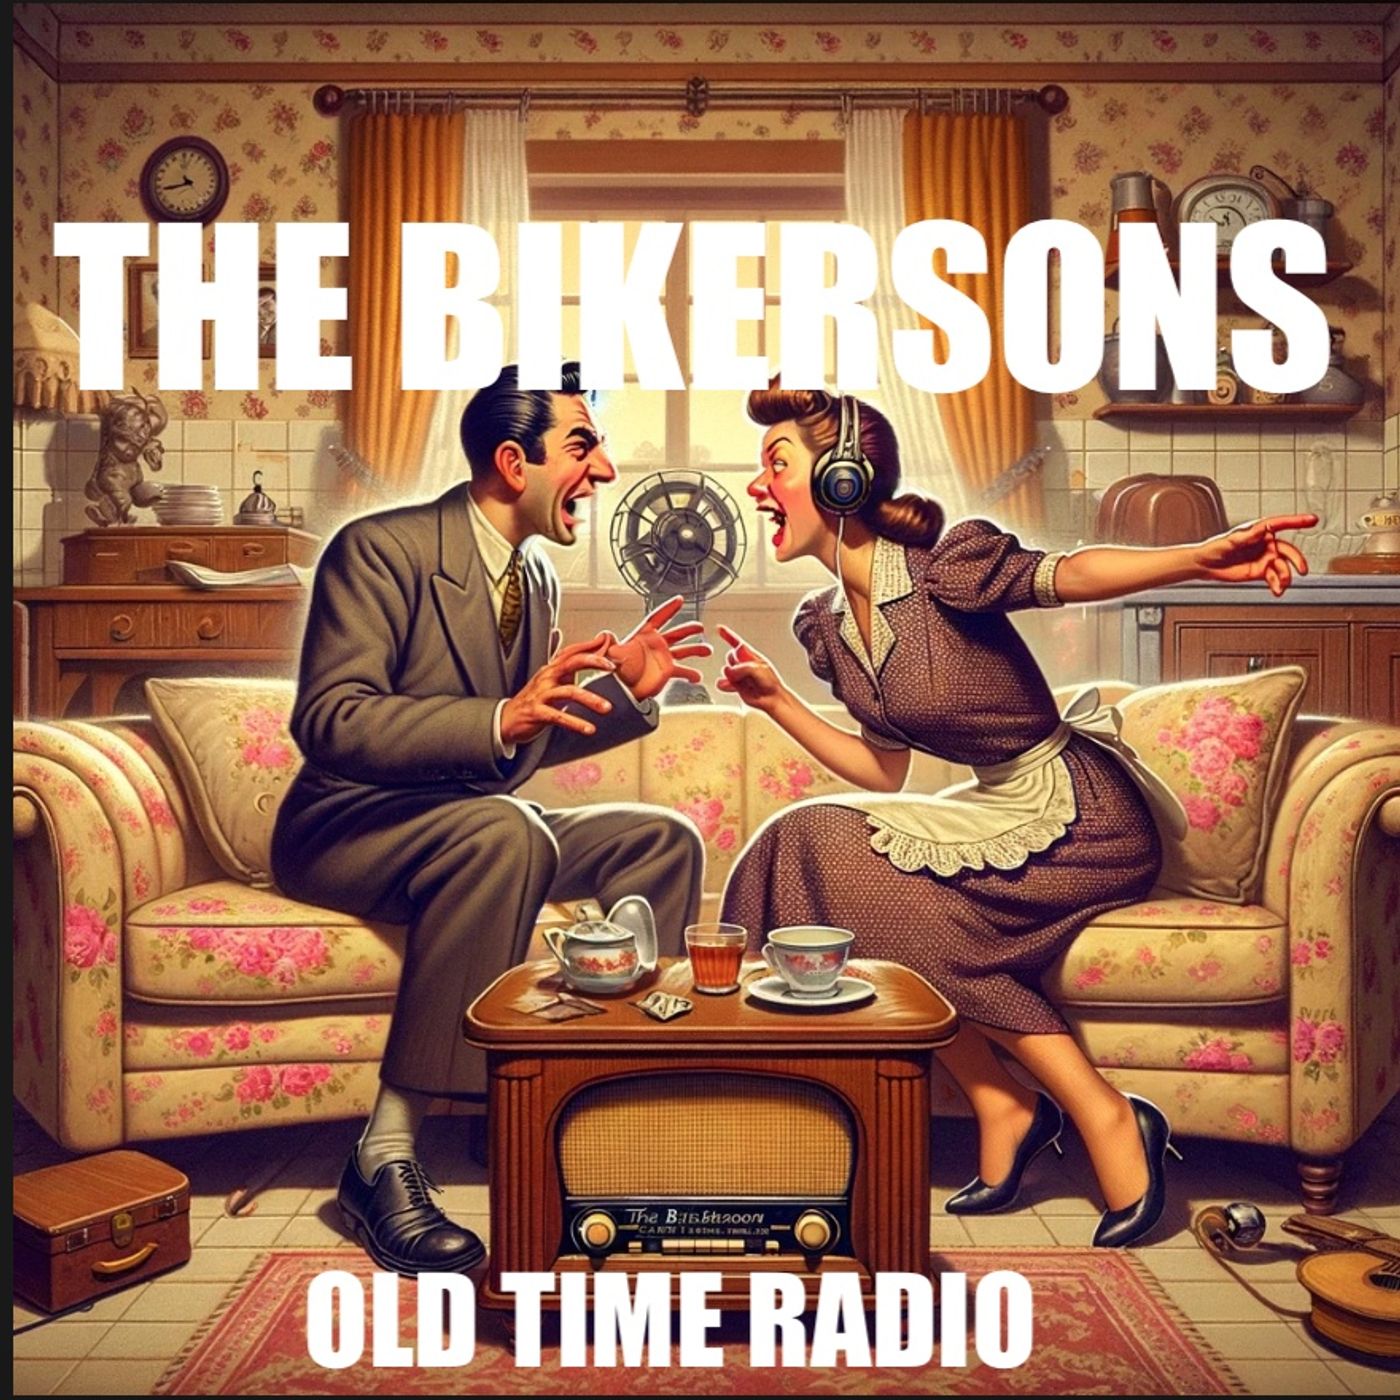 John sSnoring LewP an episode of The Bickersons - Old Time Radio